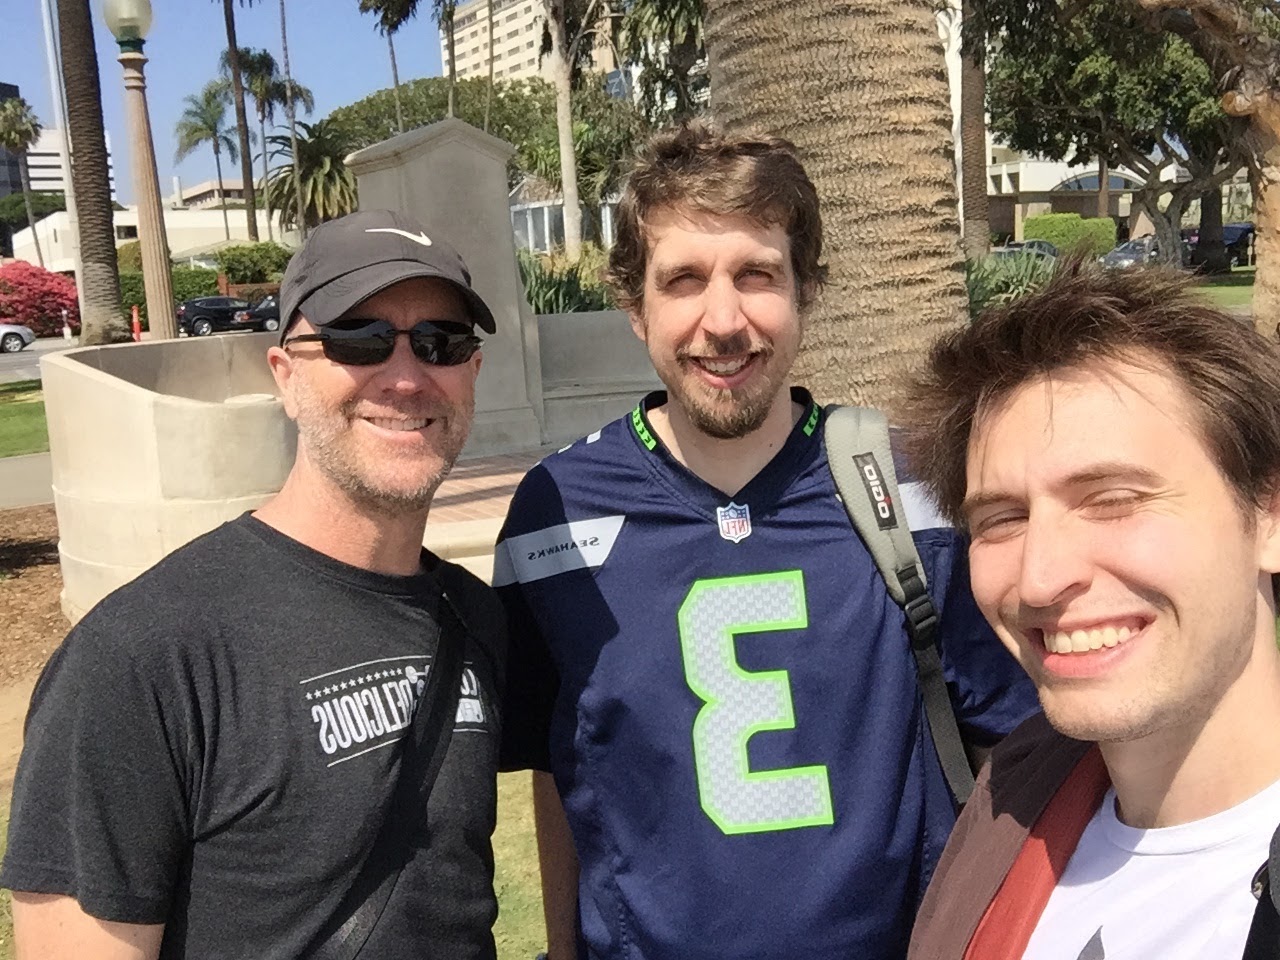 Patrick (ceo), Kevin (eng lead), and me in LA planning it all